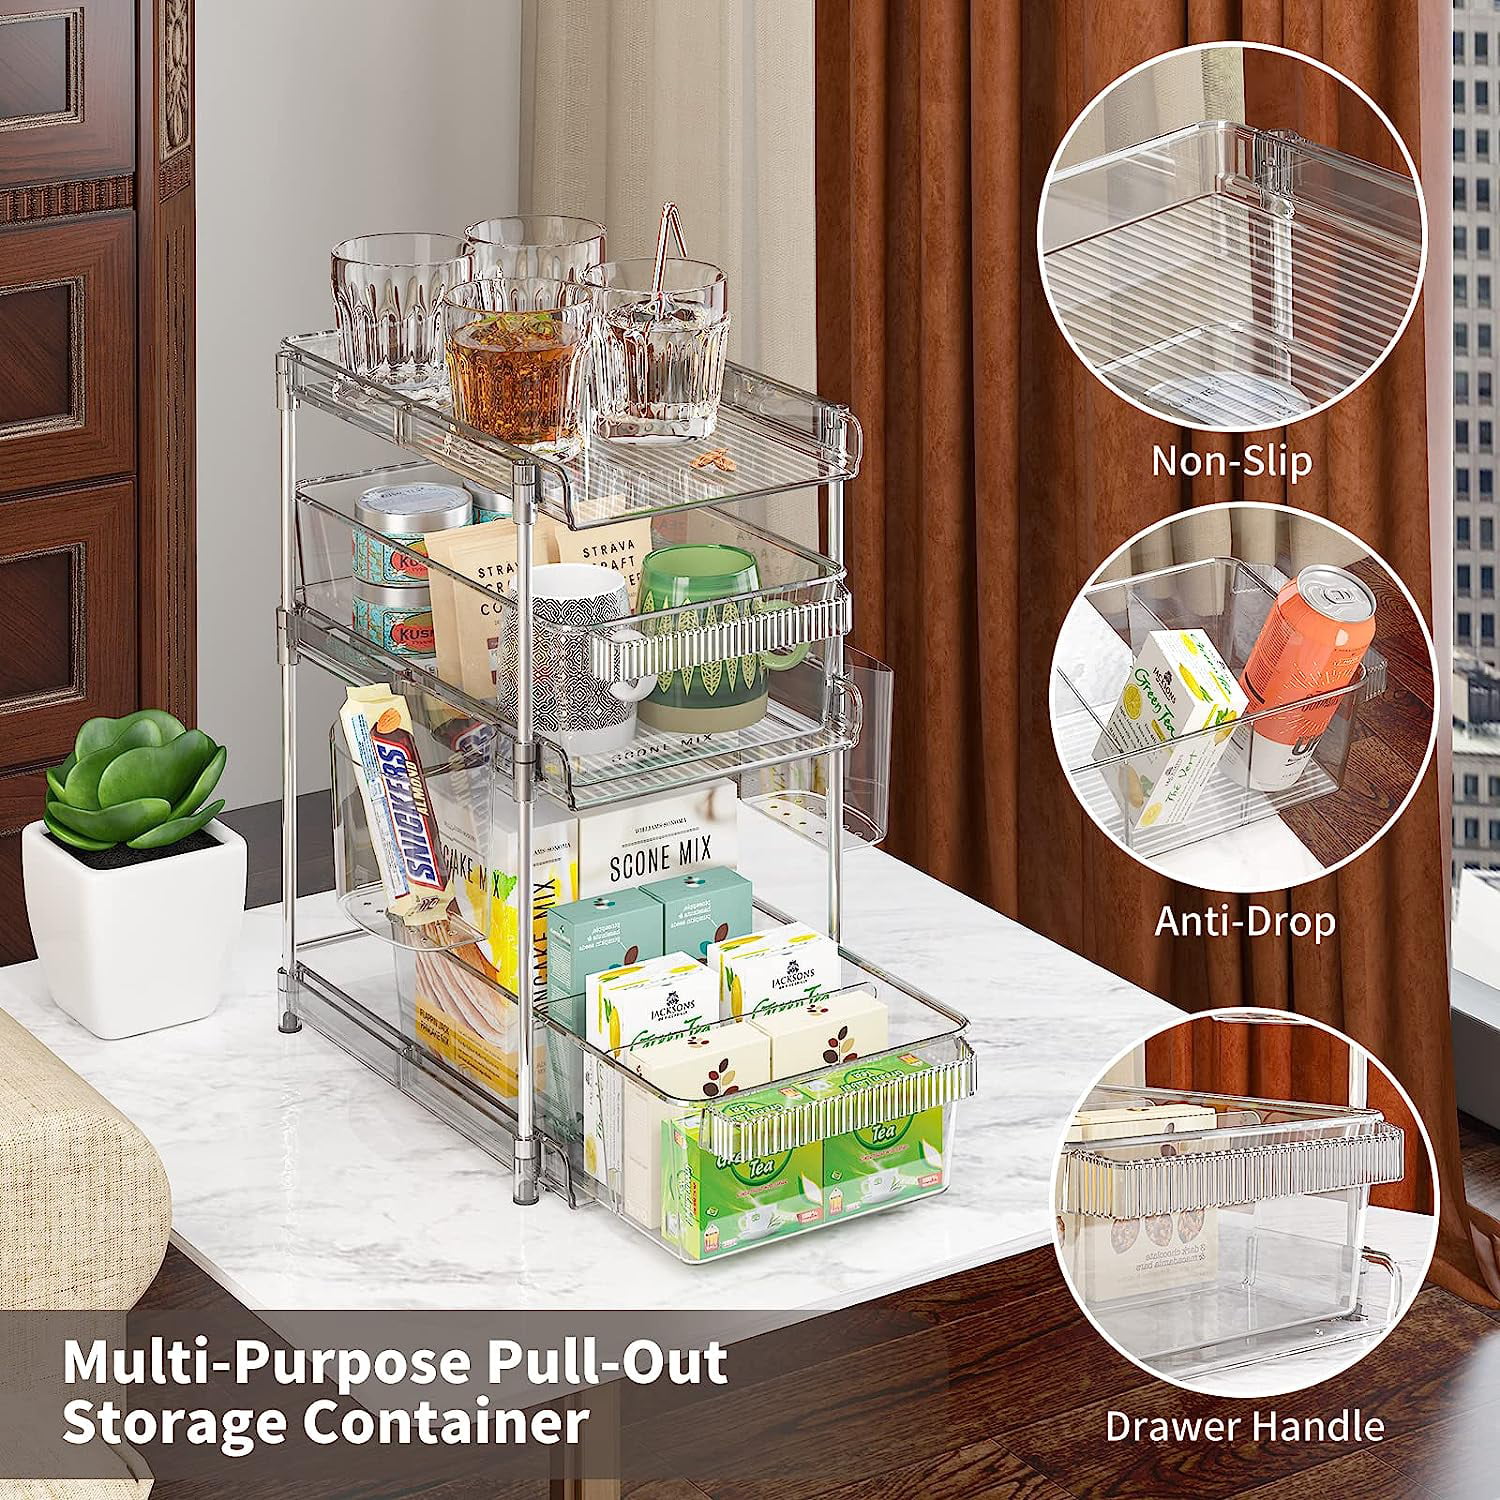 FabSpace 2 Tier Bathroom Organizer with Dividers, 2-pack – $13.99 (reg. $36)